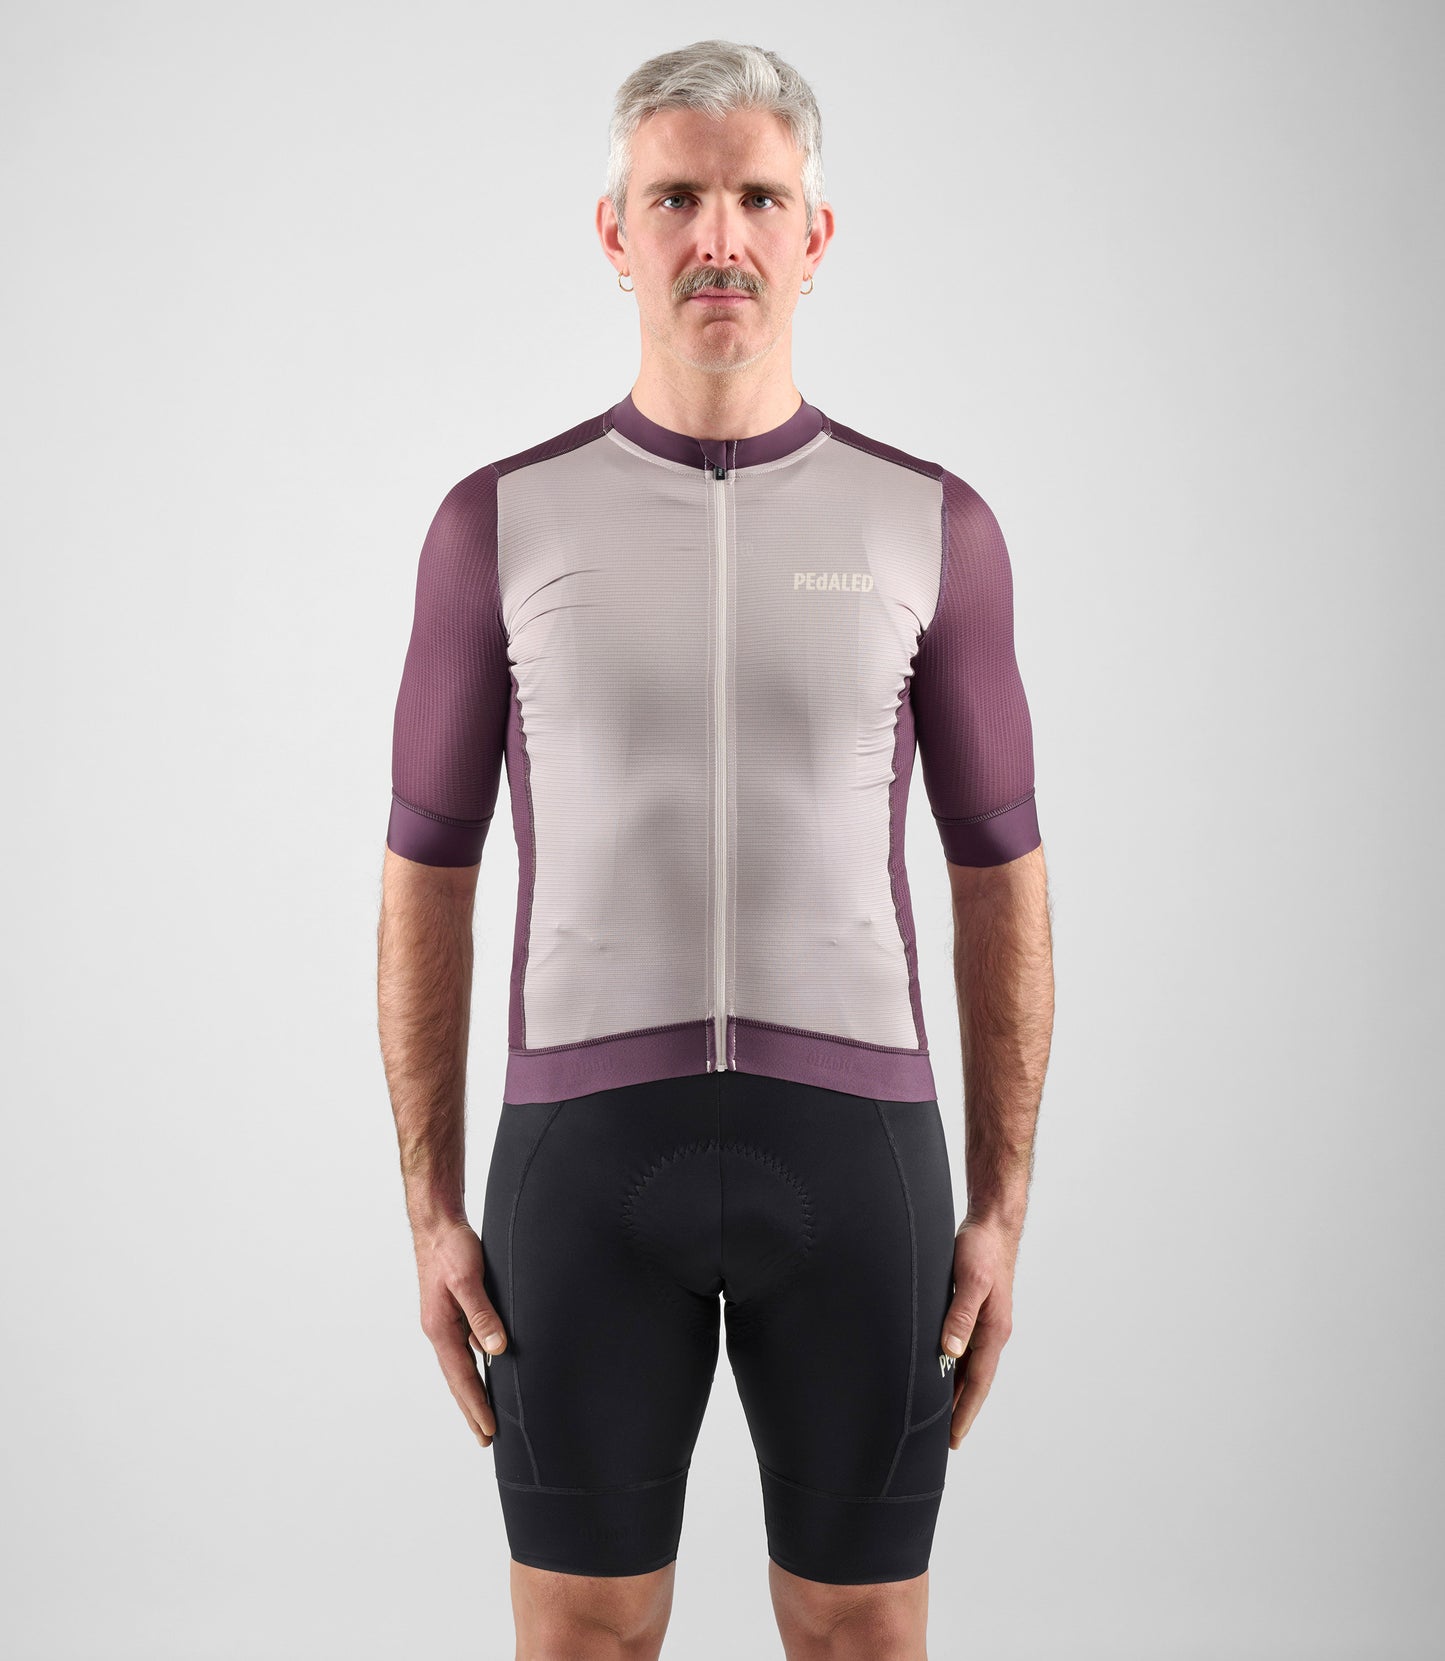 24SJSEL26PE_3_men cycling jersey element burgundy total body front pedaled